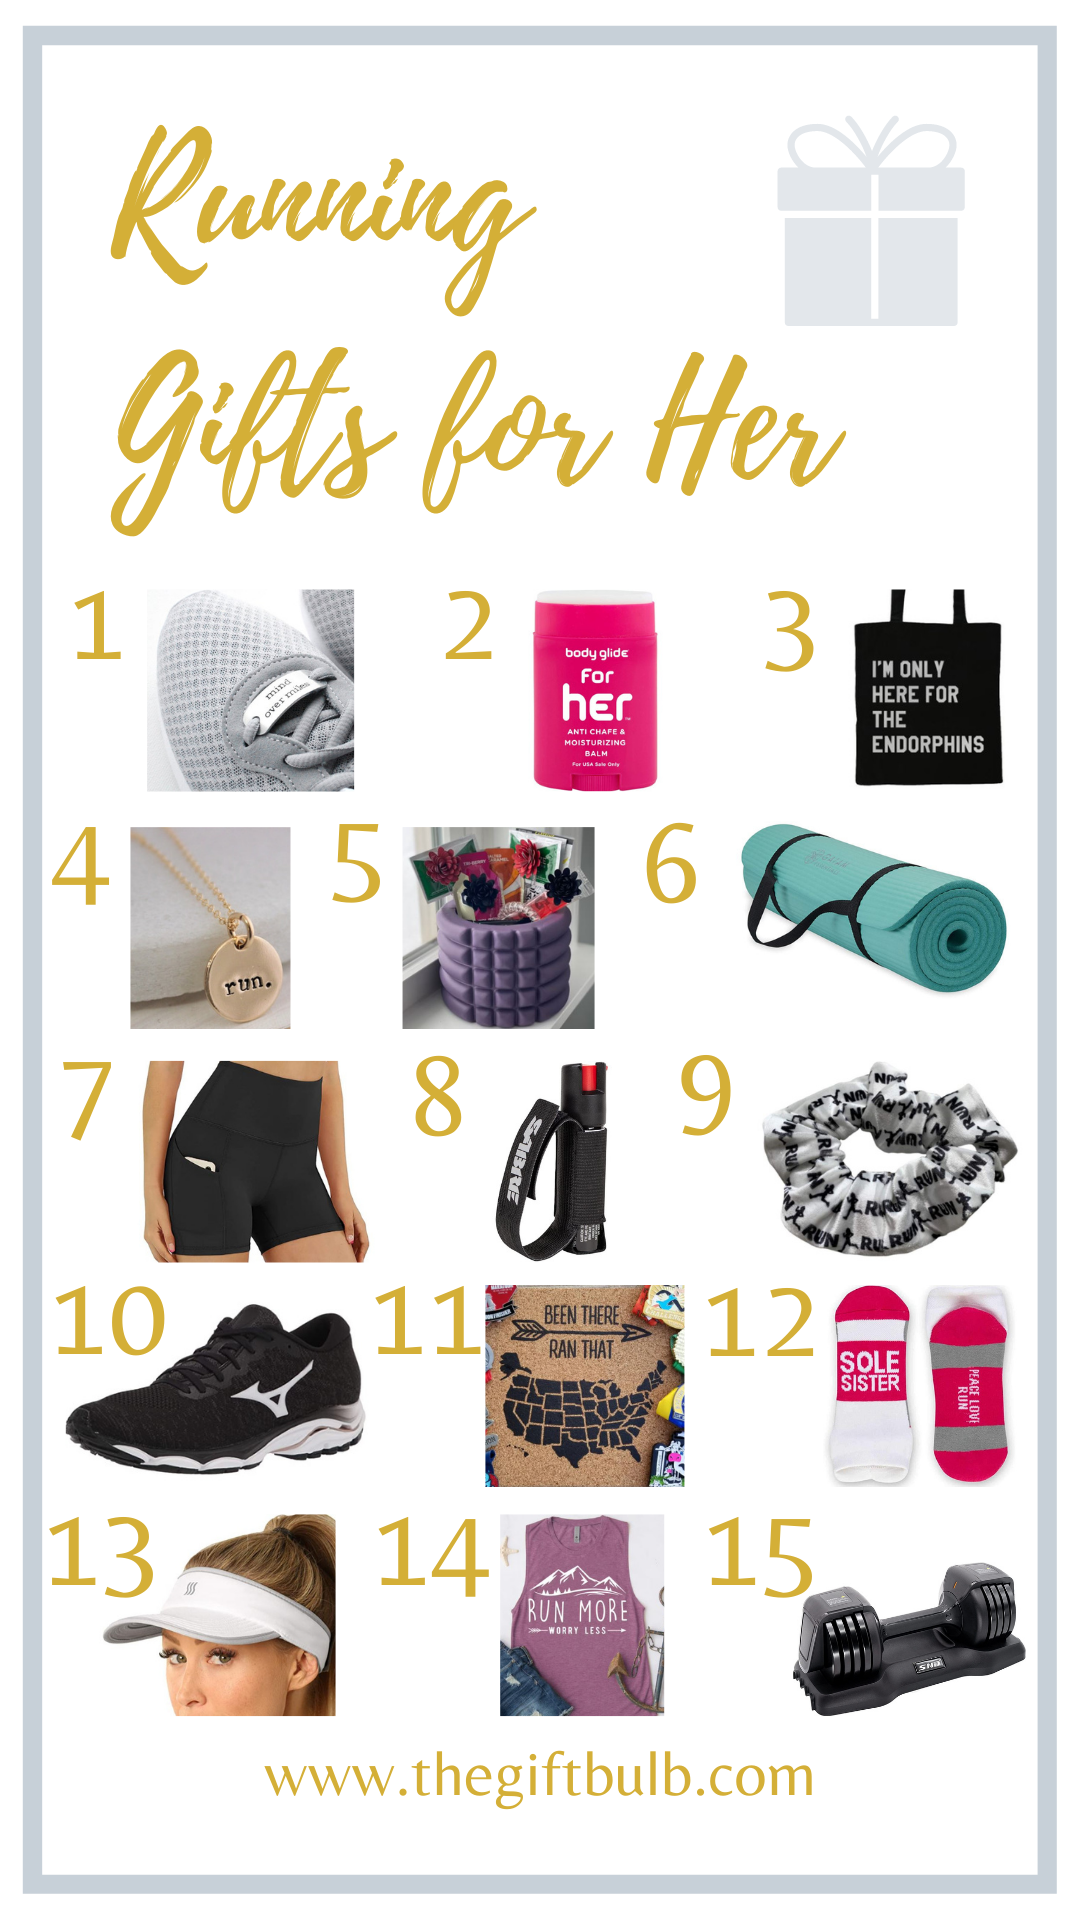 running gifts for women